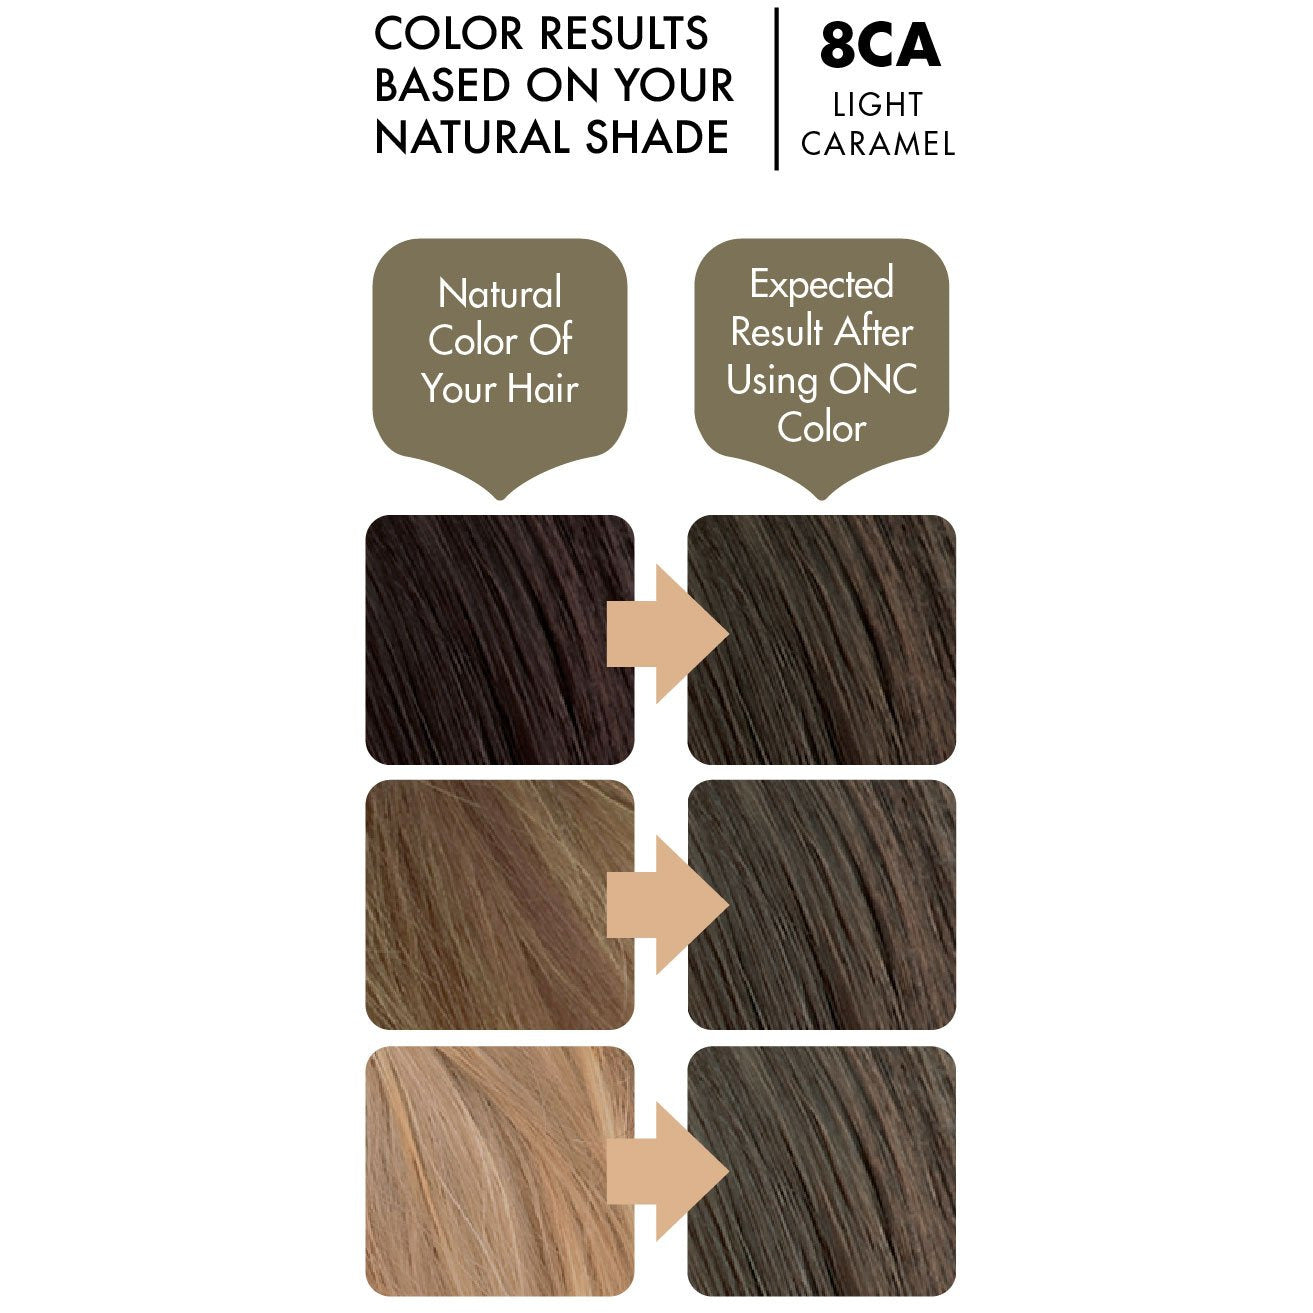 ONC 8CA Light Caramel Hair Dye With Organic Ingredients 120 mL / 4 fl. oz. Color Results